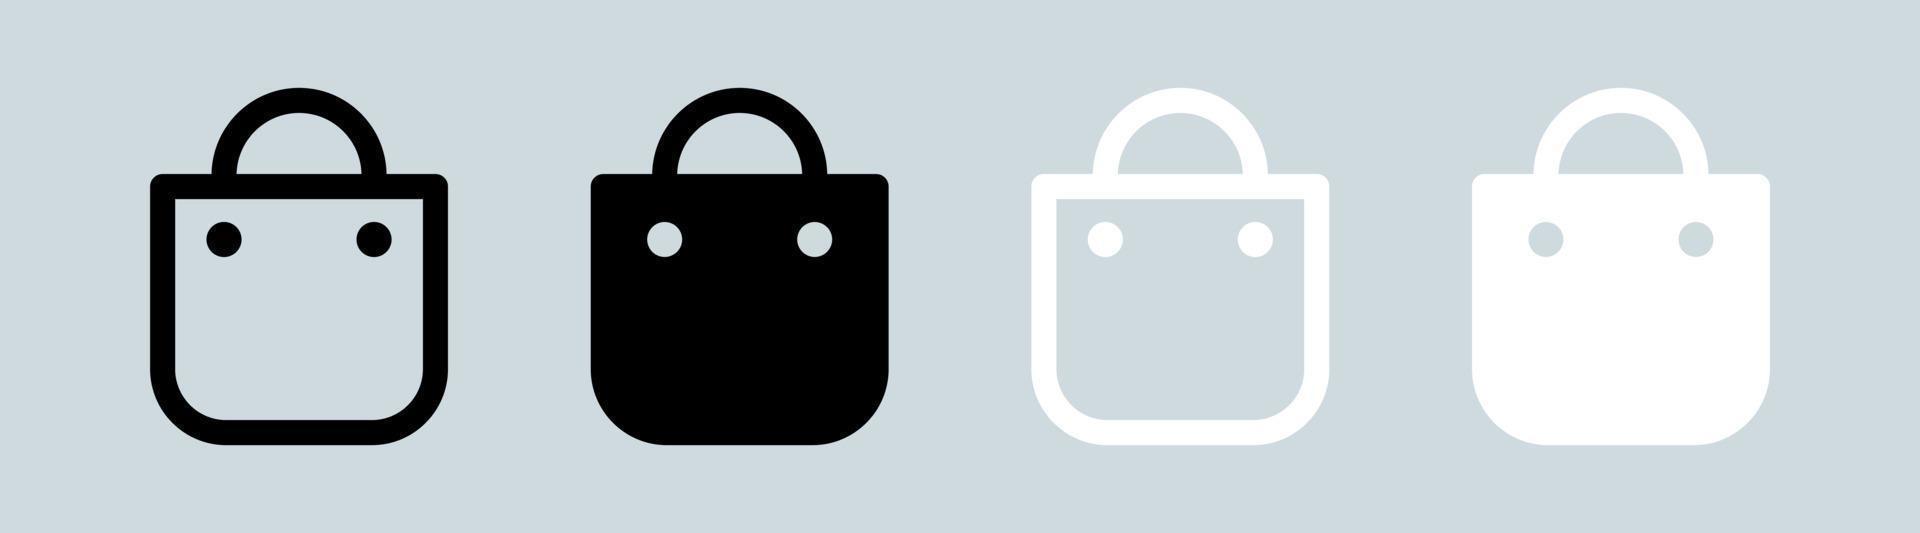 Shoping bag icon in black and white colors. Shop bag sign for web or commerce apps interface. vector